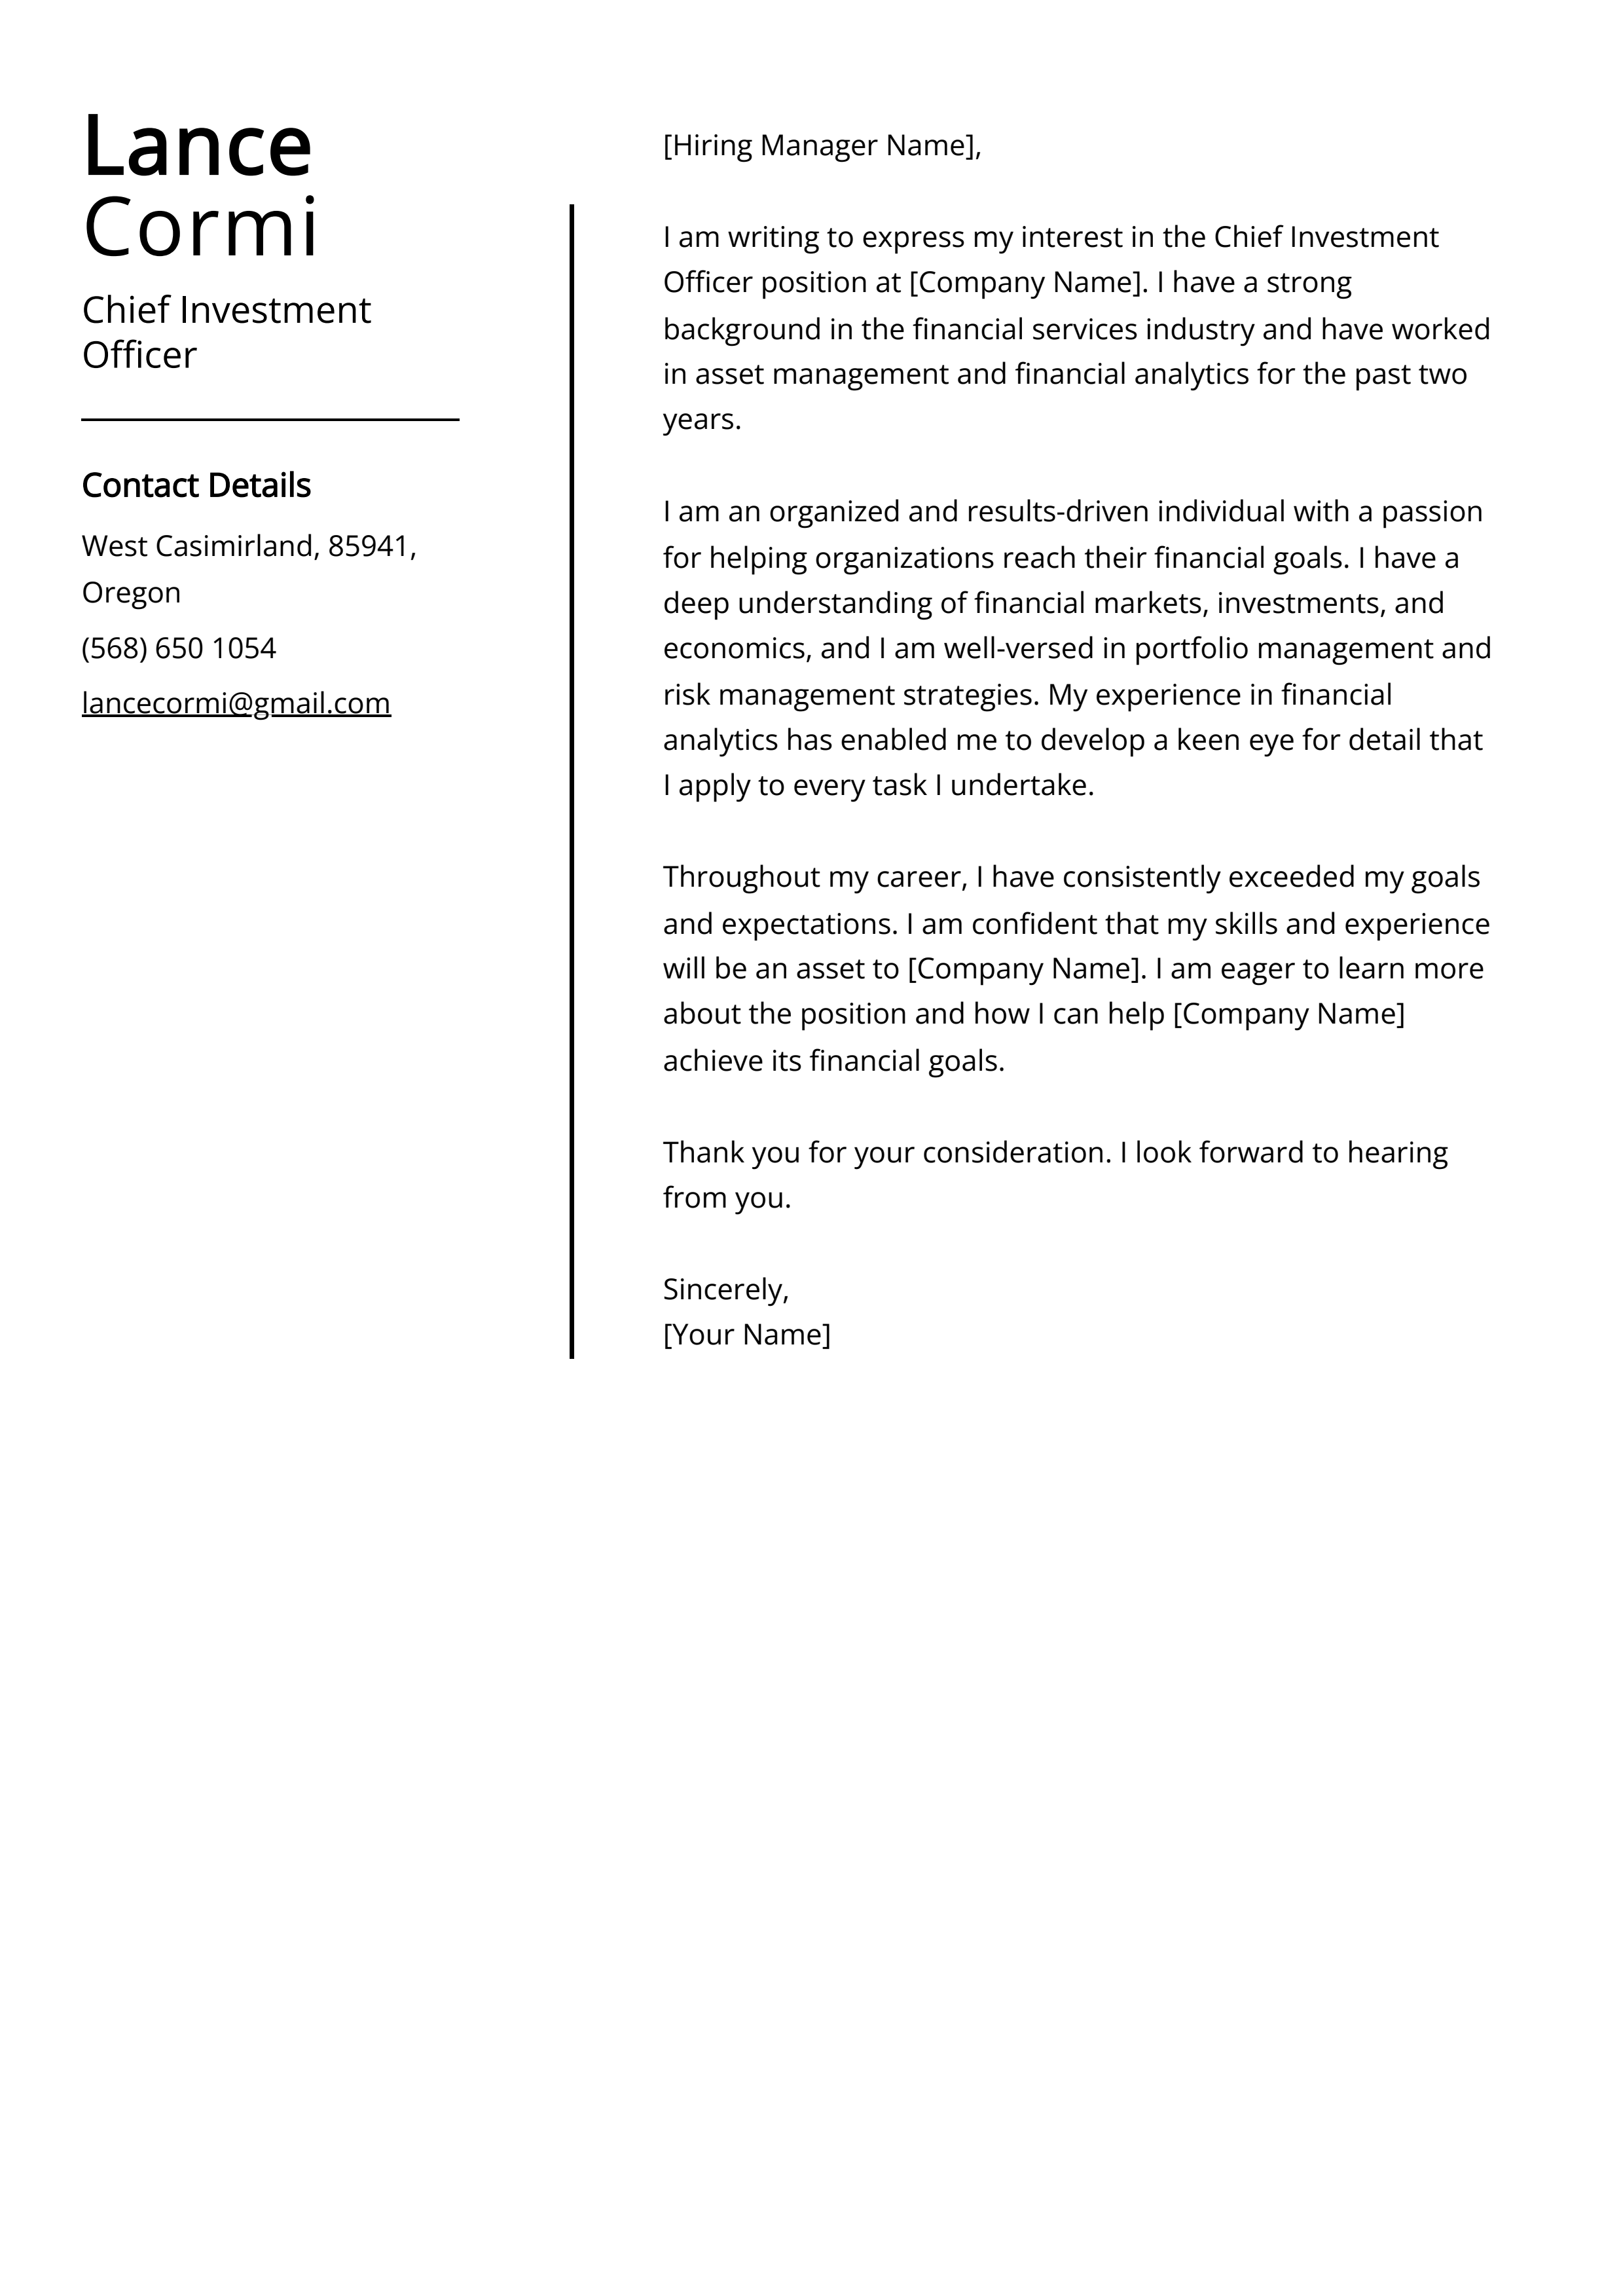 Chief Investment Officer Cover Letter Example